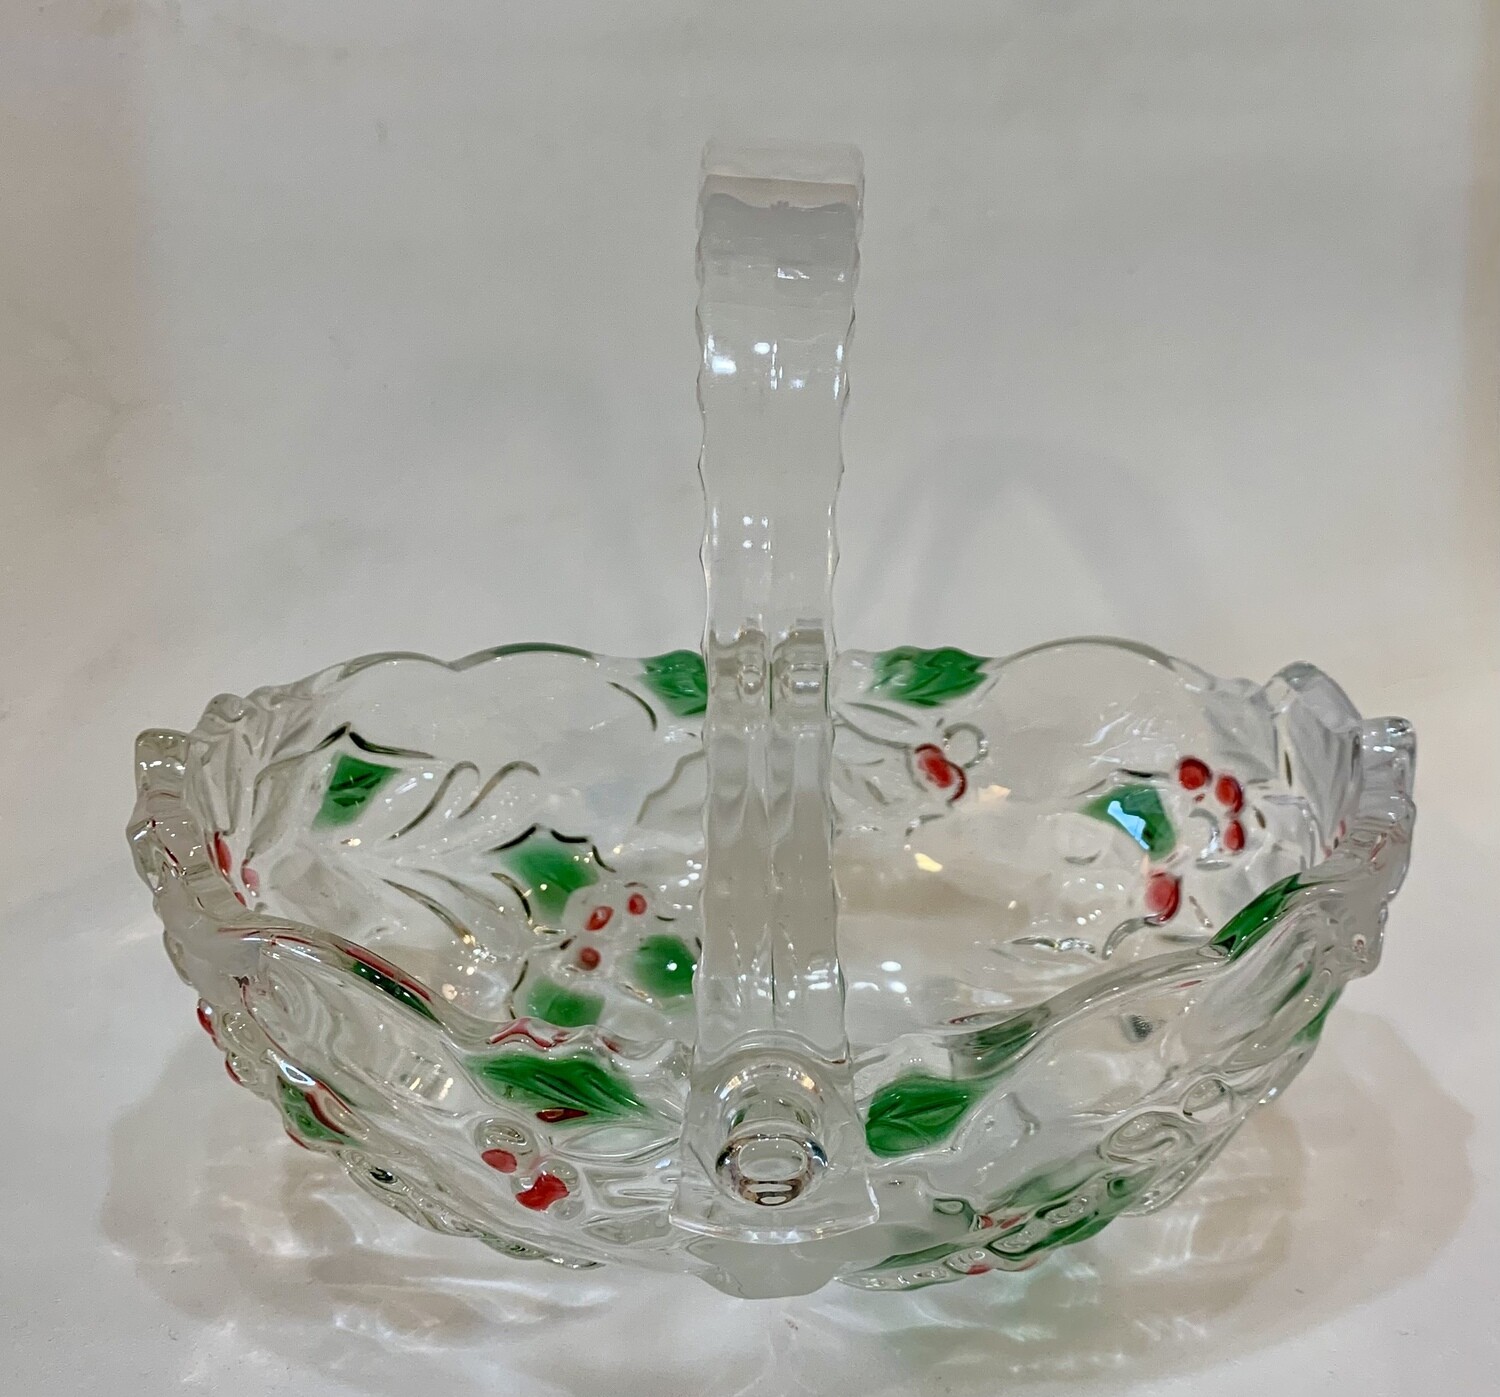 Vintage Mikasa Holiday Bloom pattern clear glass handled basket with frosted flowers, red berries and green leaves design Germany